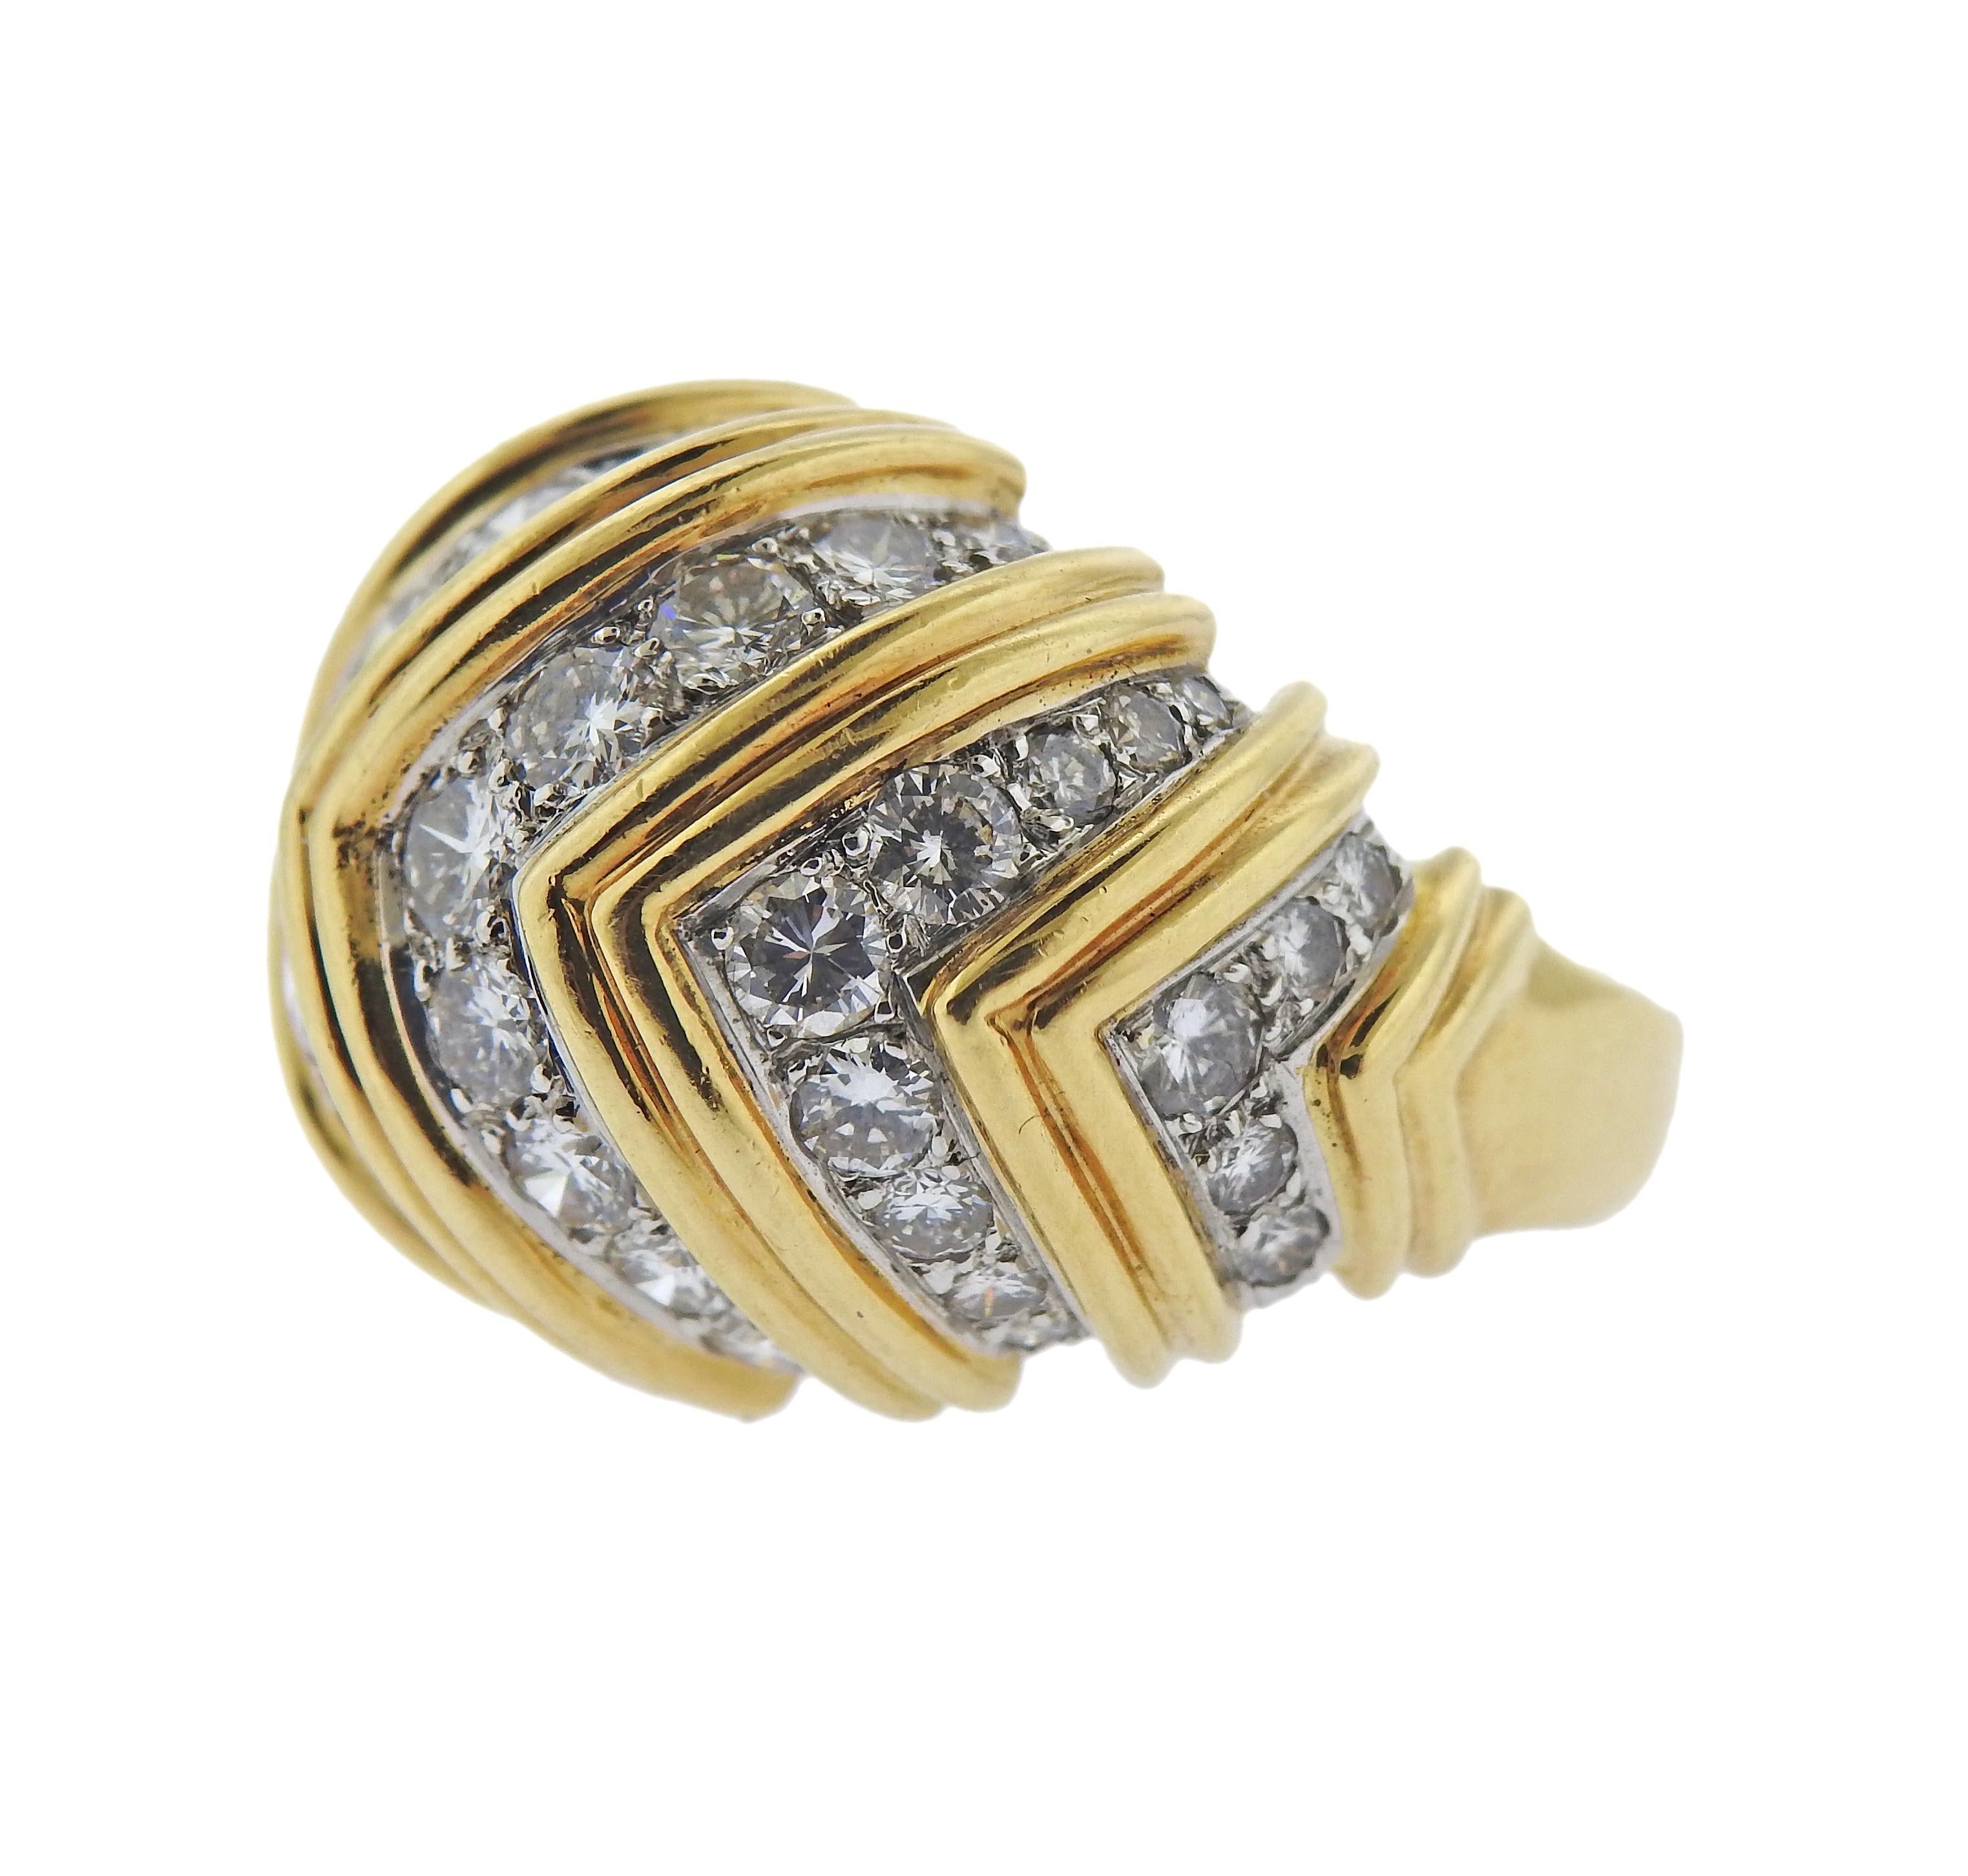 18k yellow and white gold dome ring by Tiffany & Co, with approx. 3 carats in diamonds. Ring size - 7, ring top - 18mm wide. Marked: Tiffany & Co (under the shank). Weight - 18.2 grams.